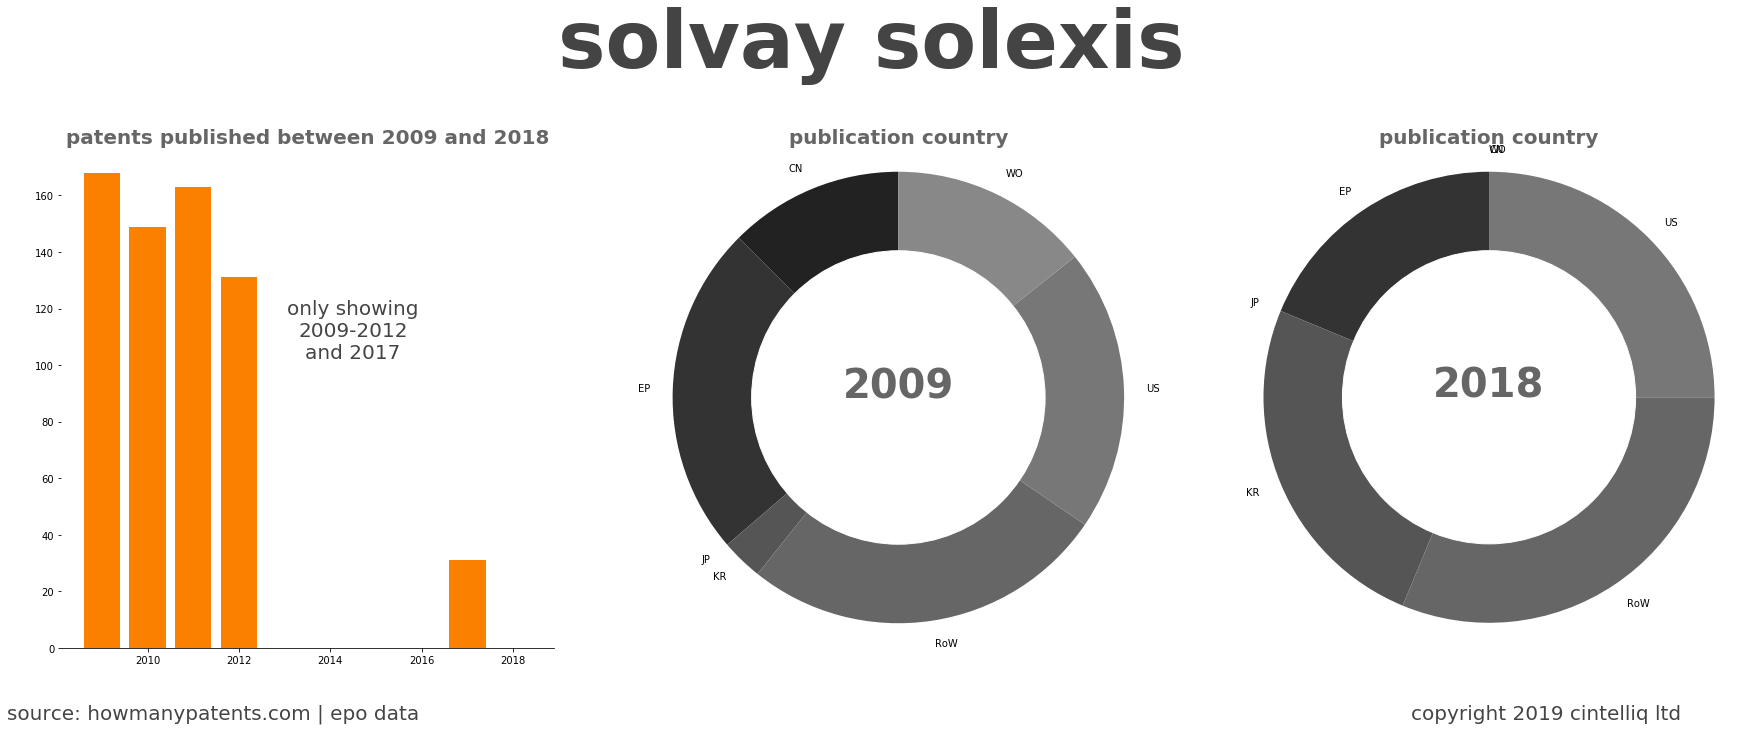 summary of patents for Solvay Solexis